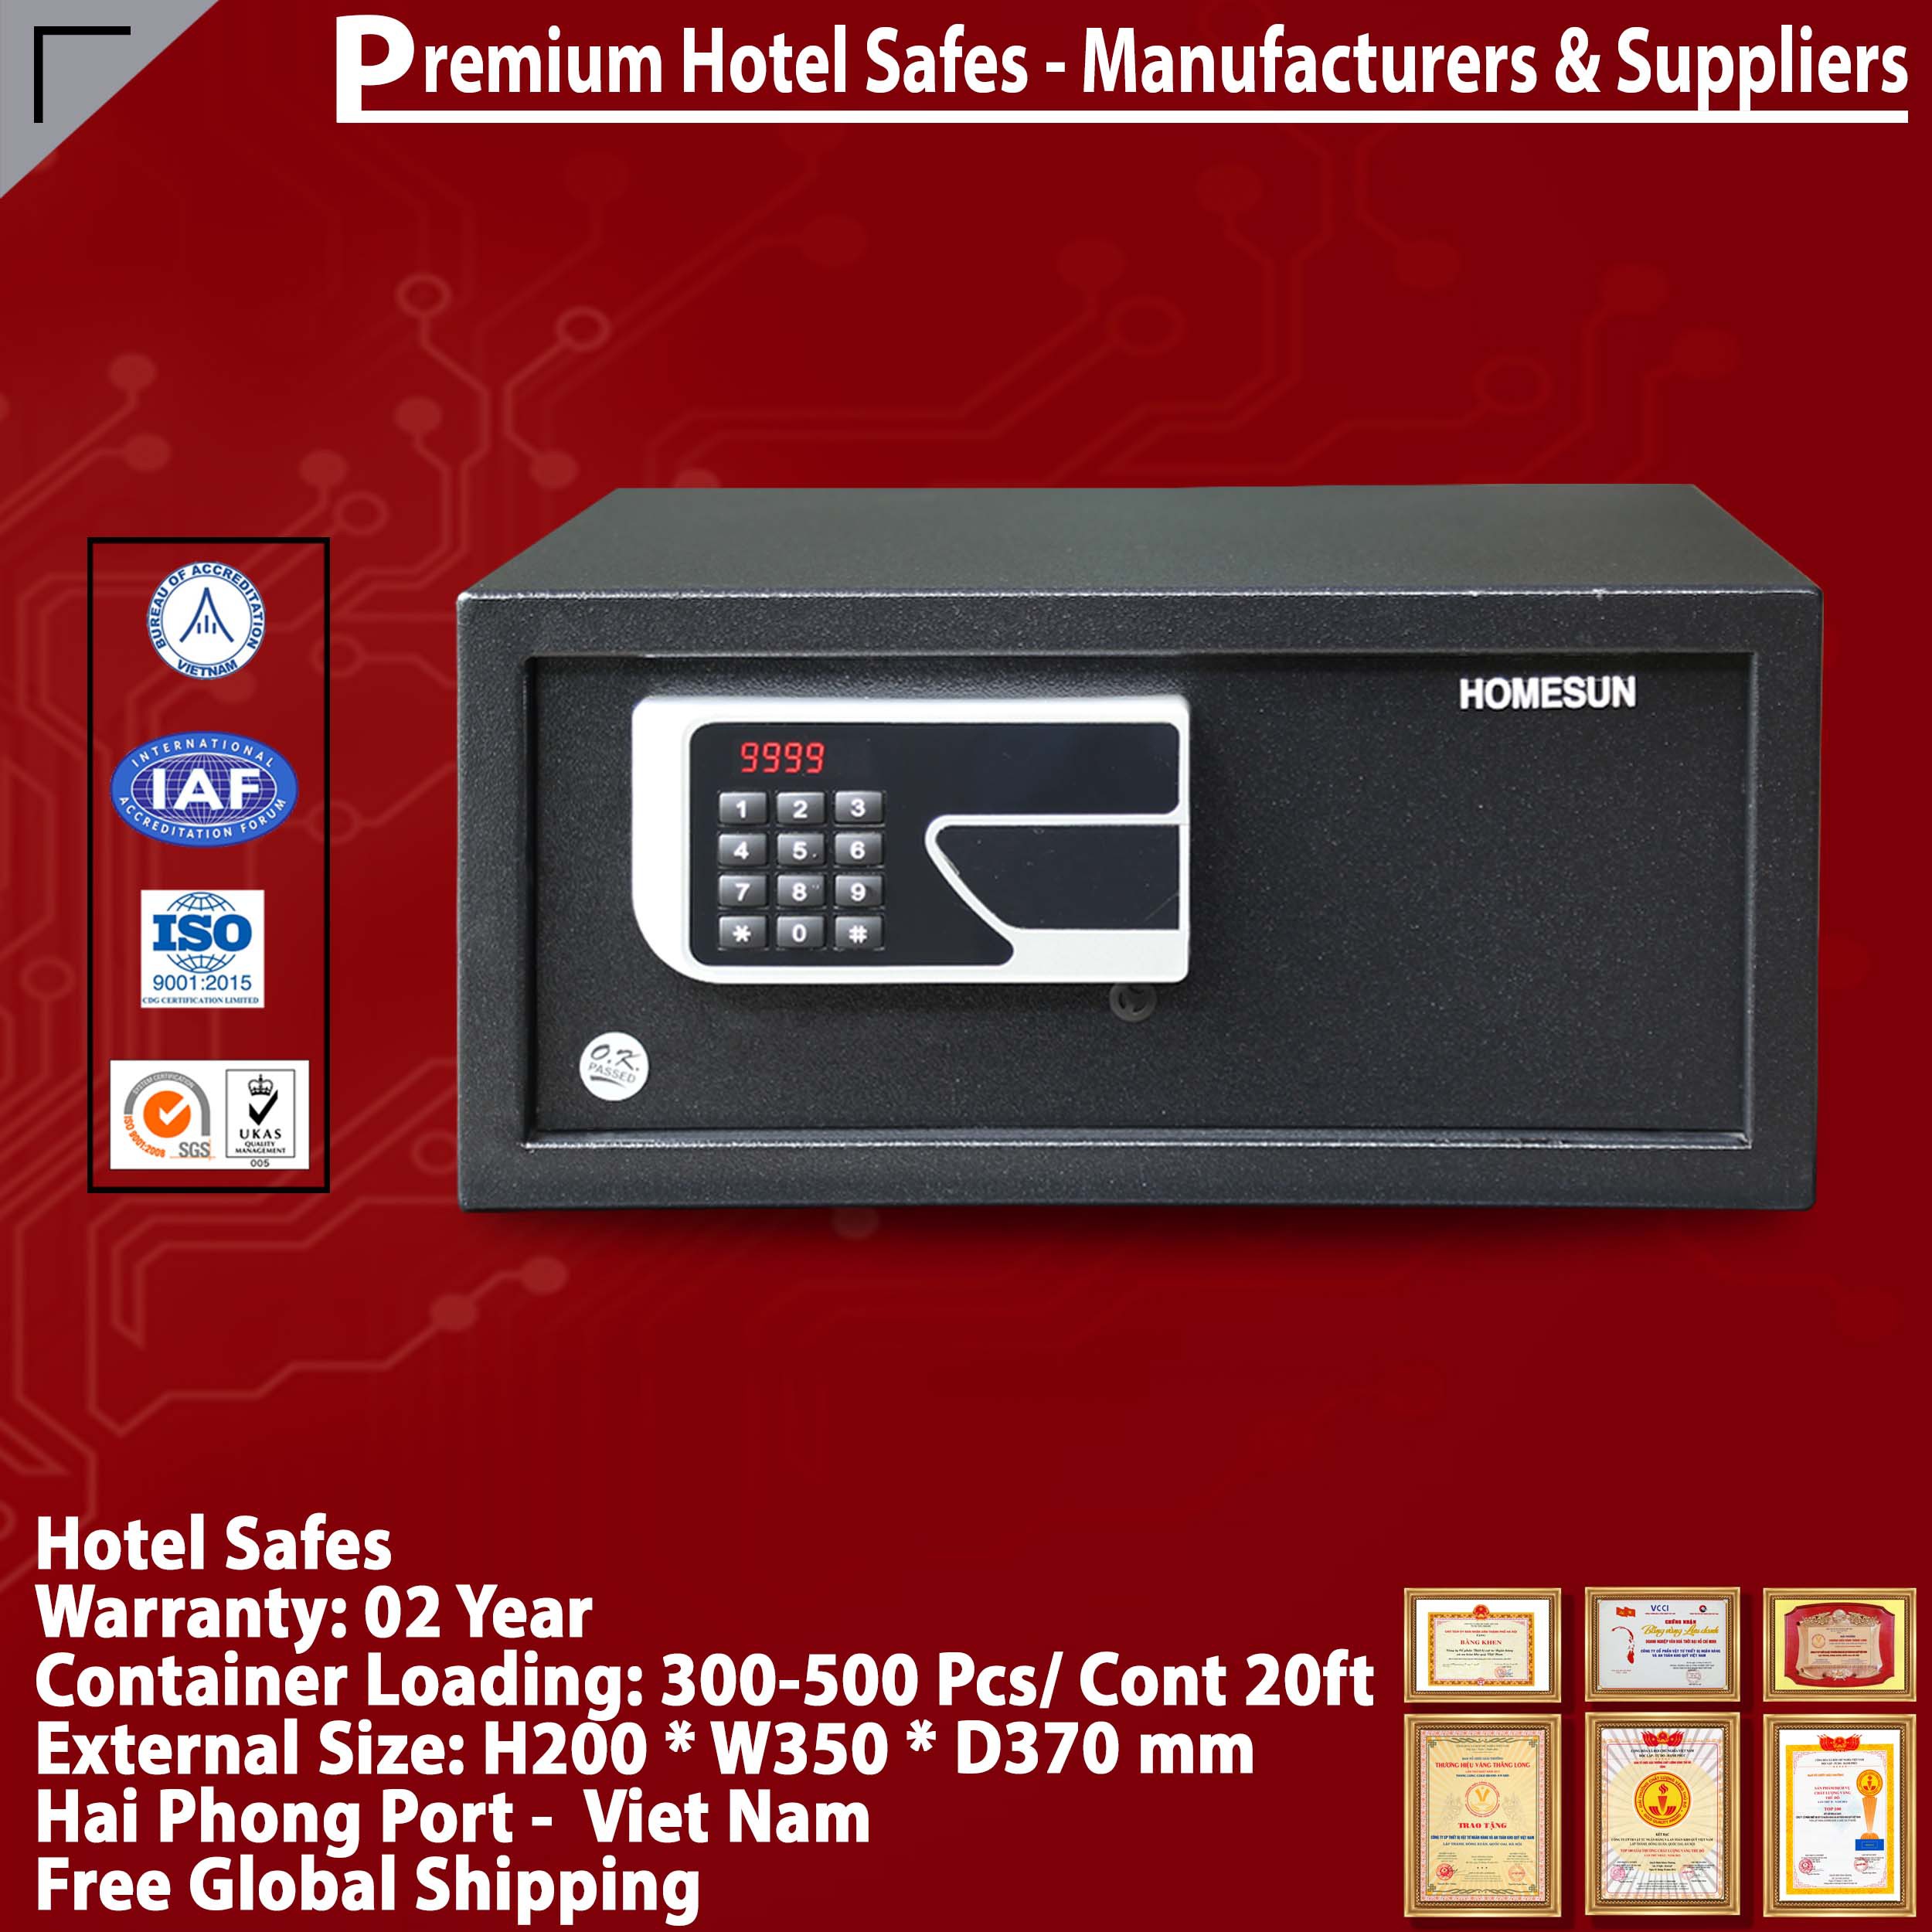 Hotel Room Safe Factory Direct & Fast Shipping‎